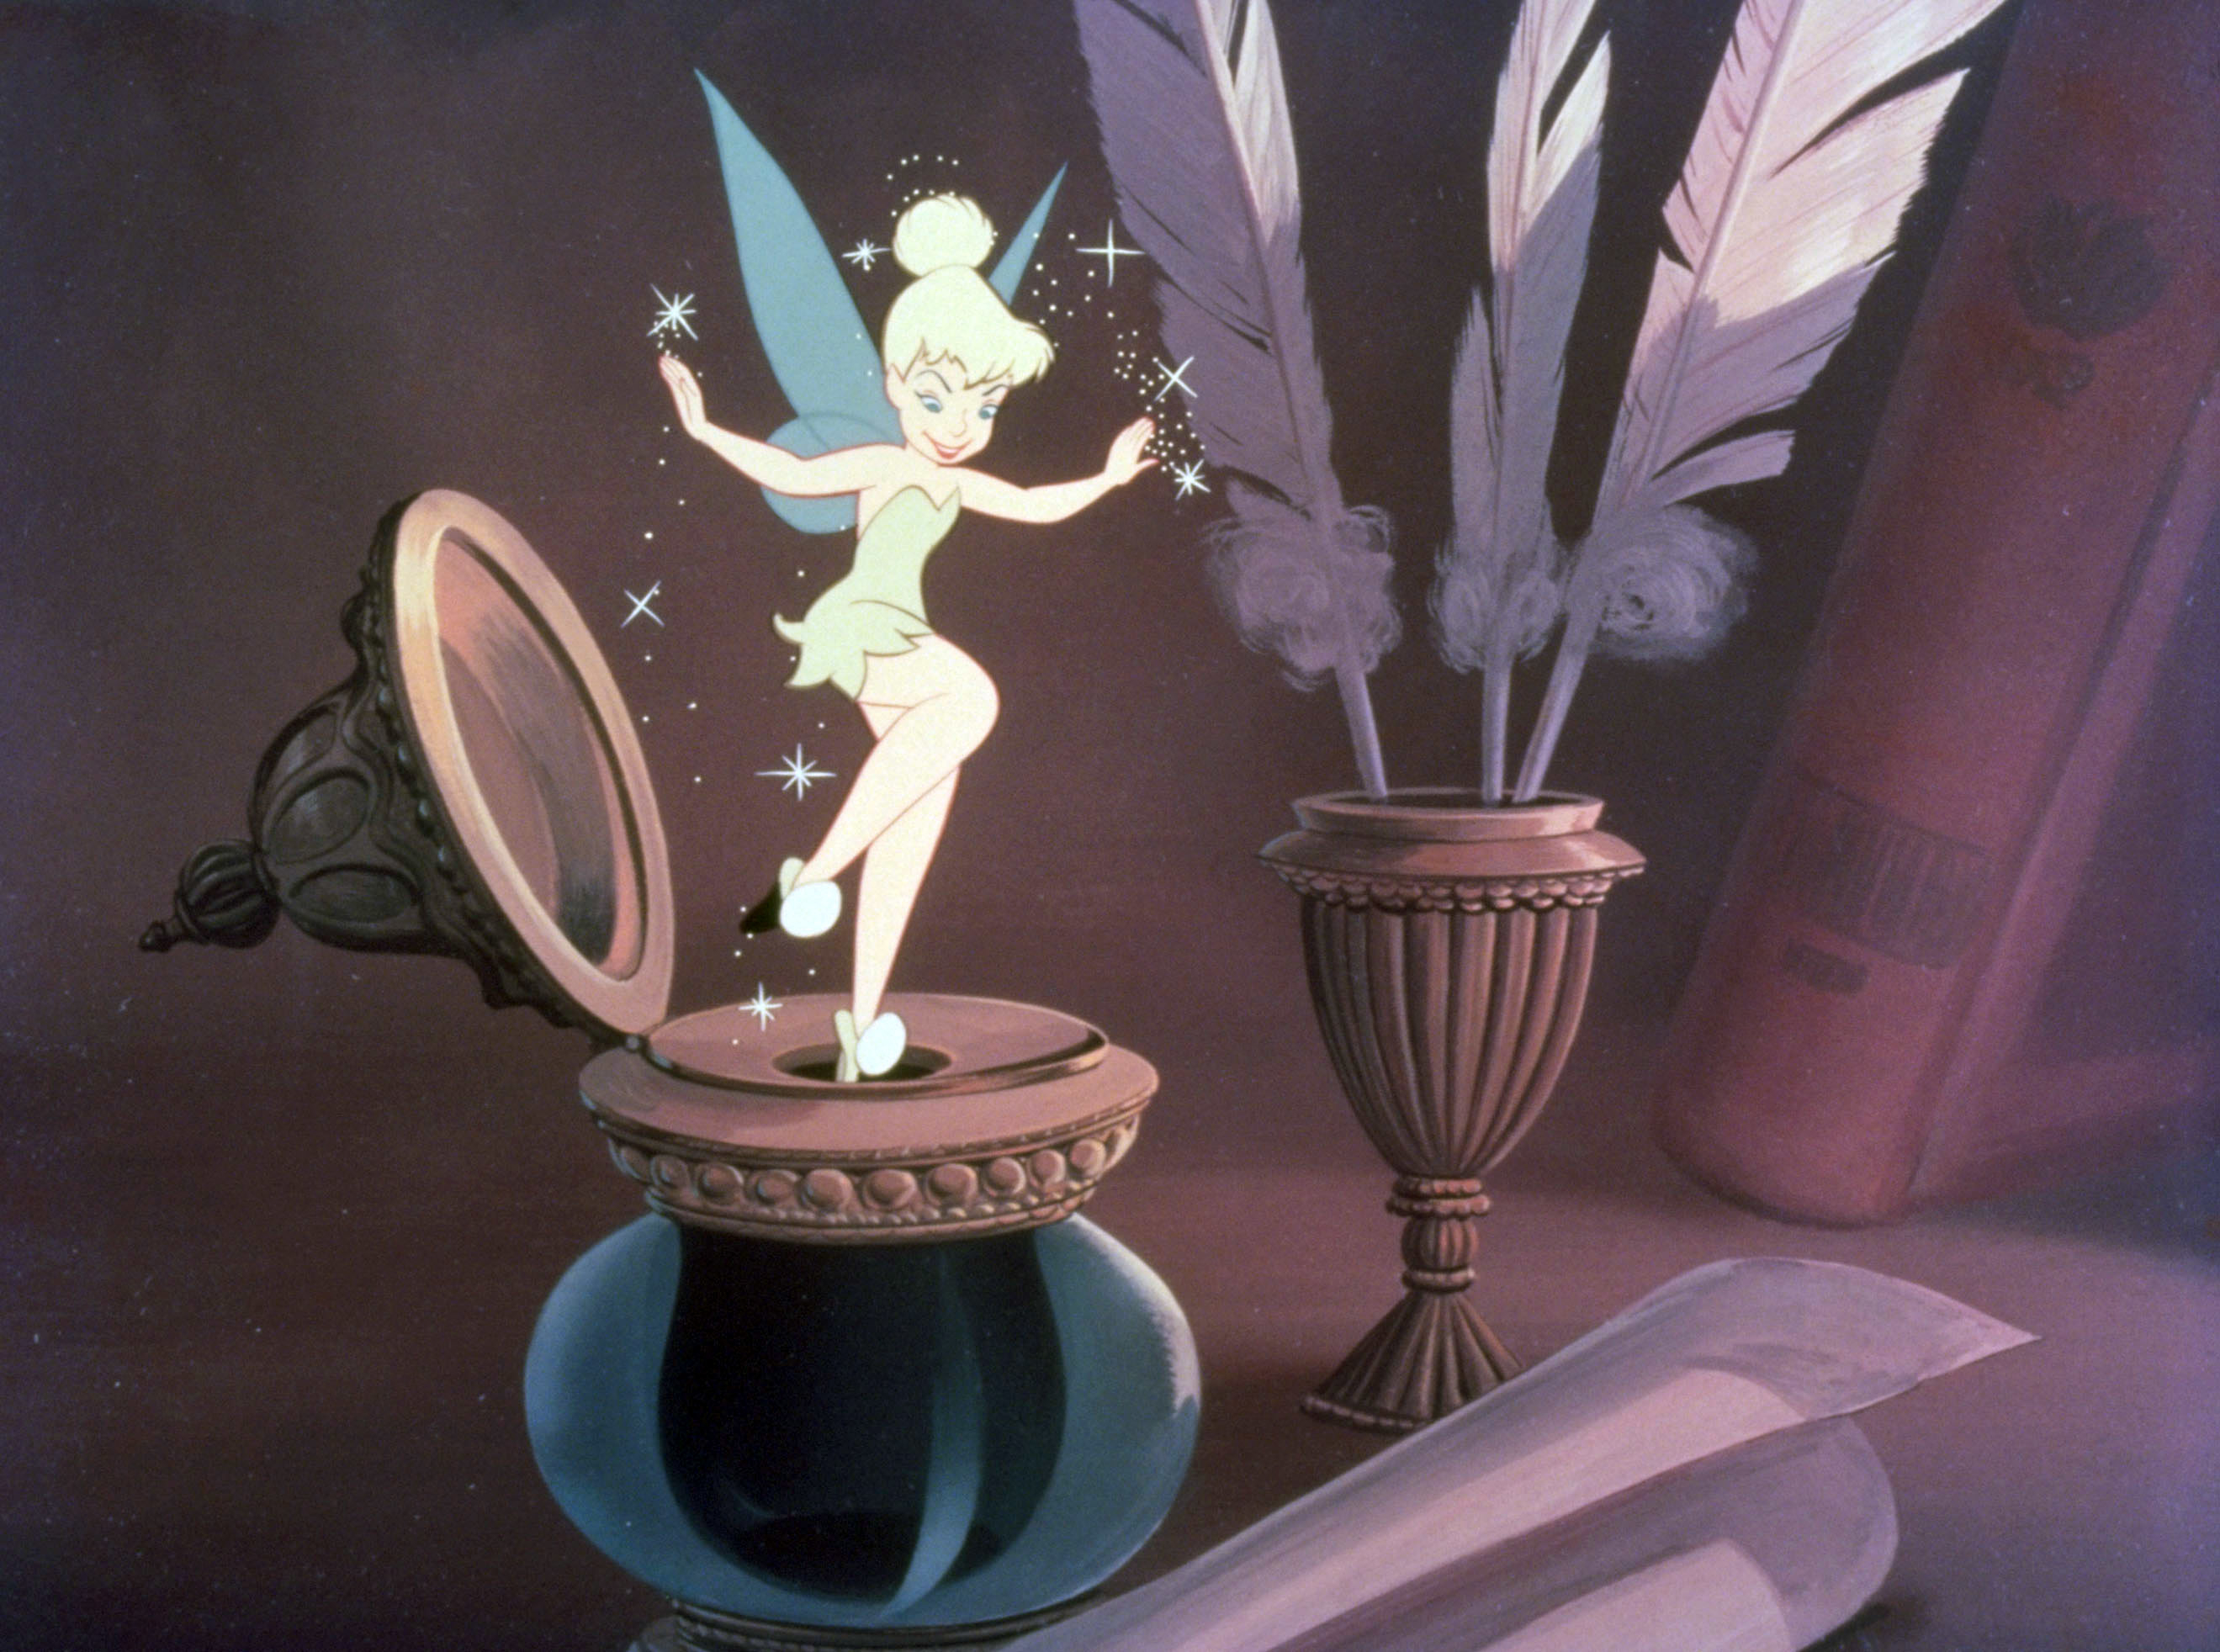 Tinker Bell from Peter Pan is standing on a mirror, with a feather and books in the background